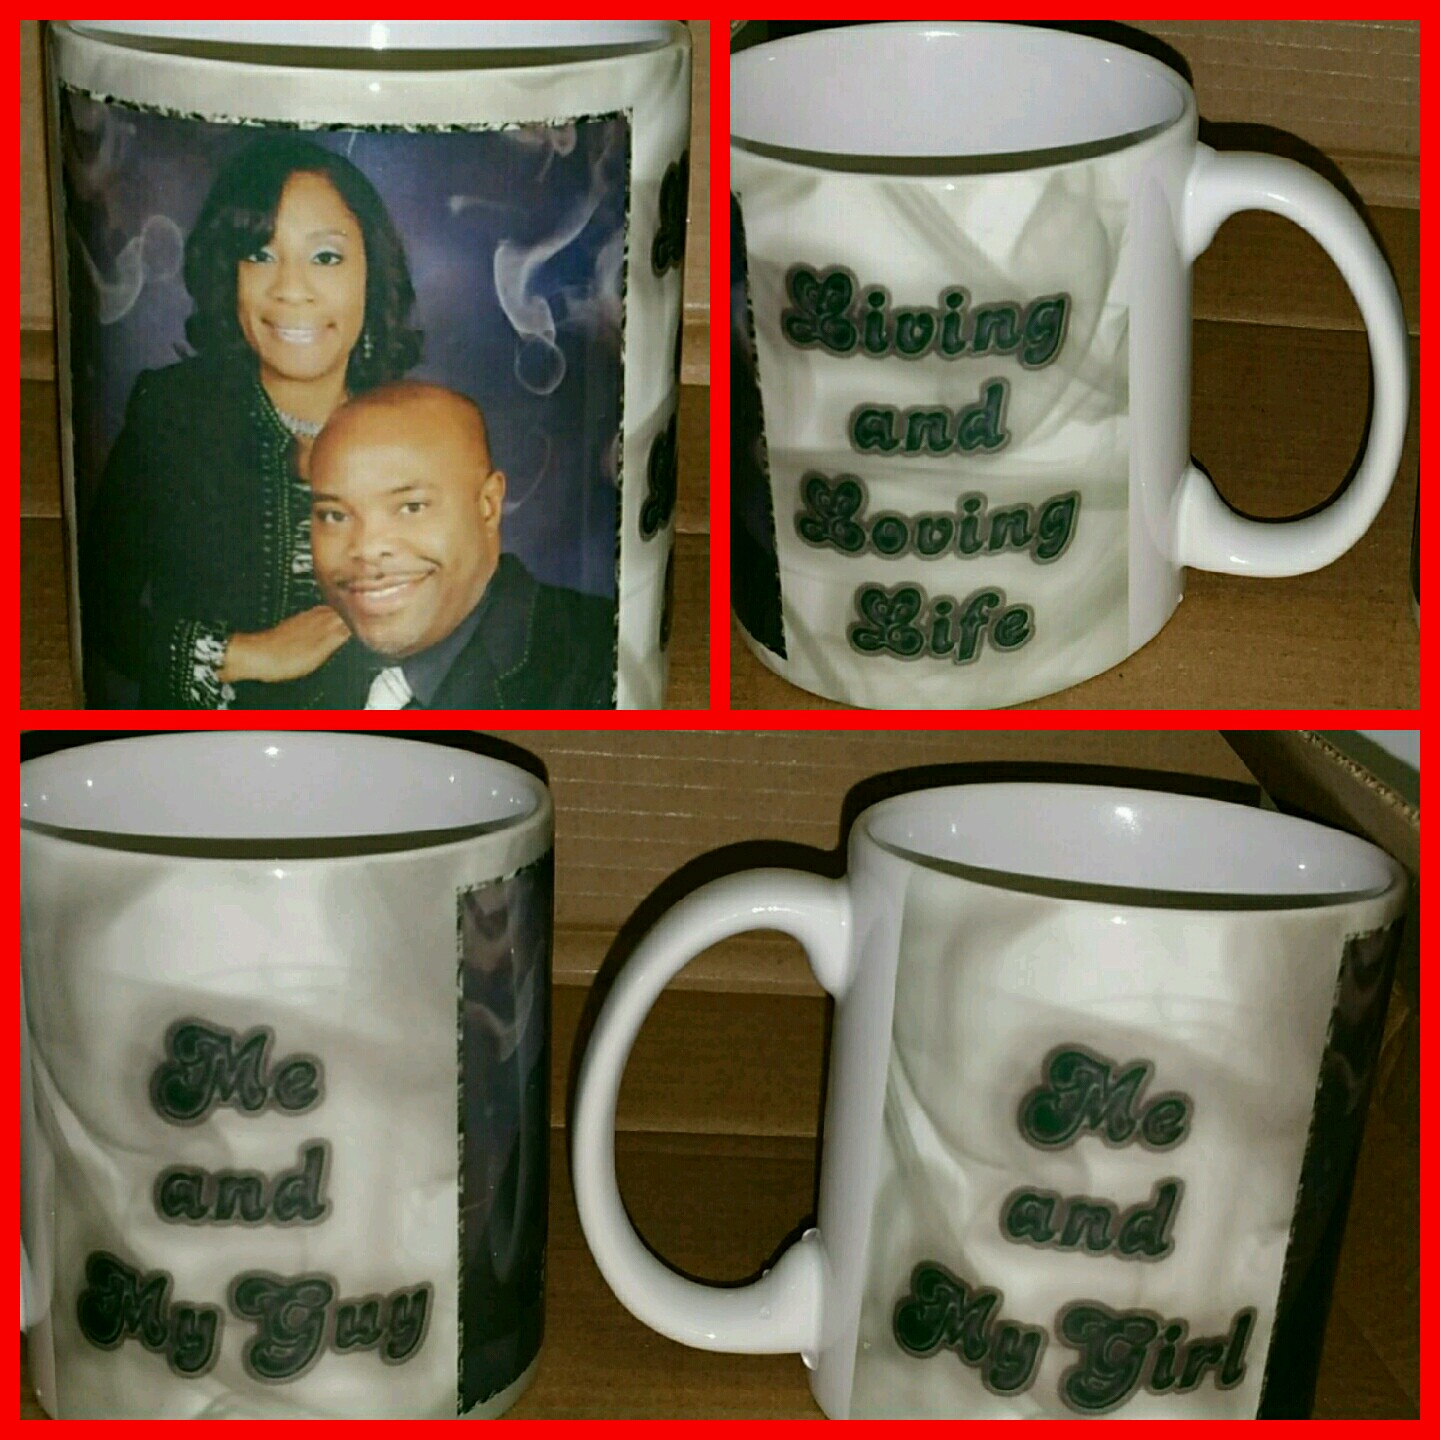 MY FIRST SUBLIMATION MUG made with sublimation printing